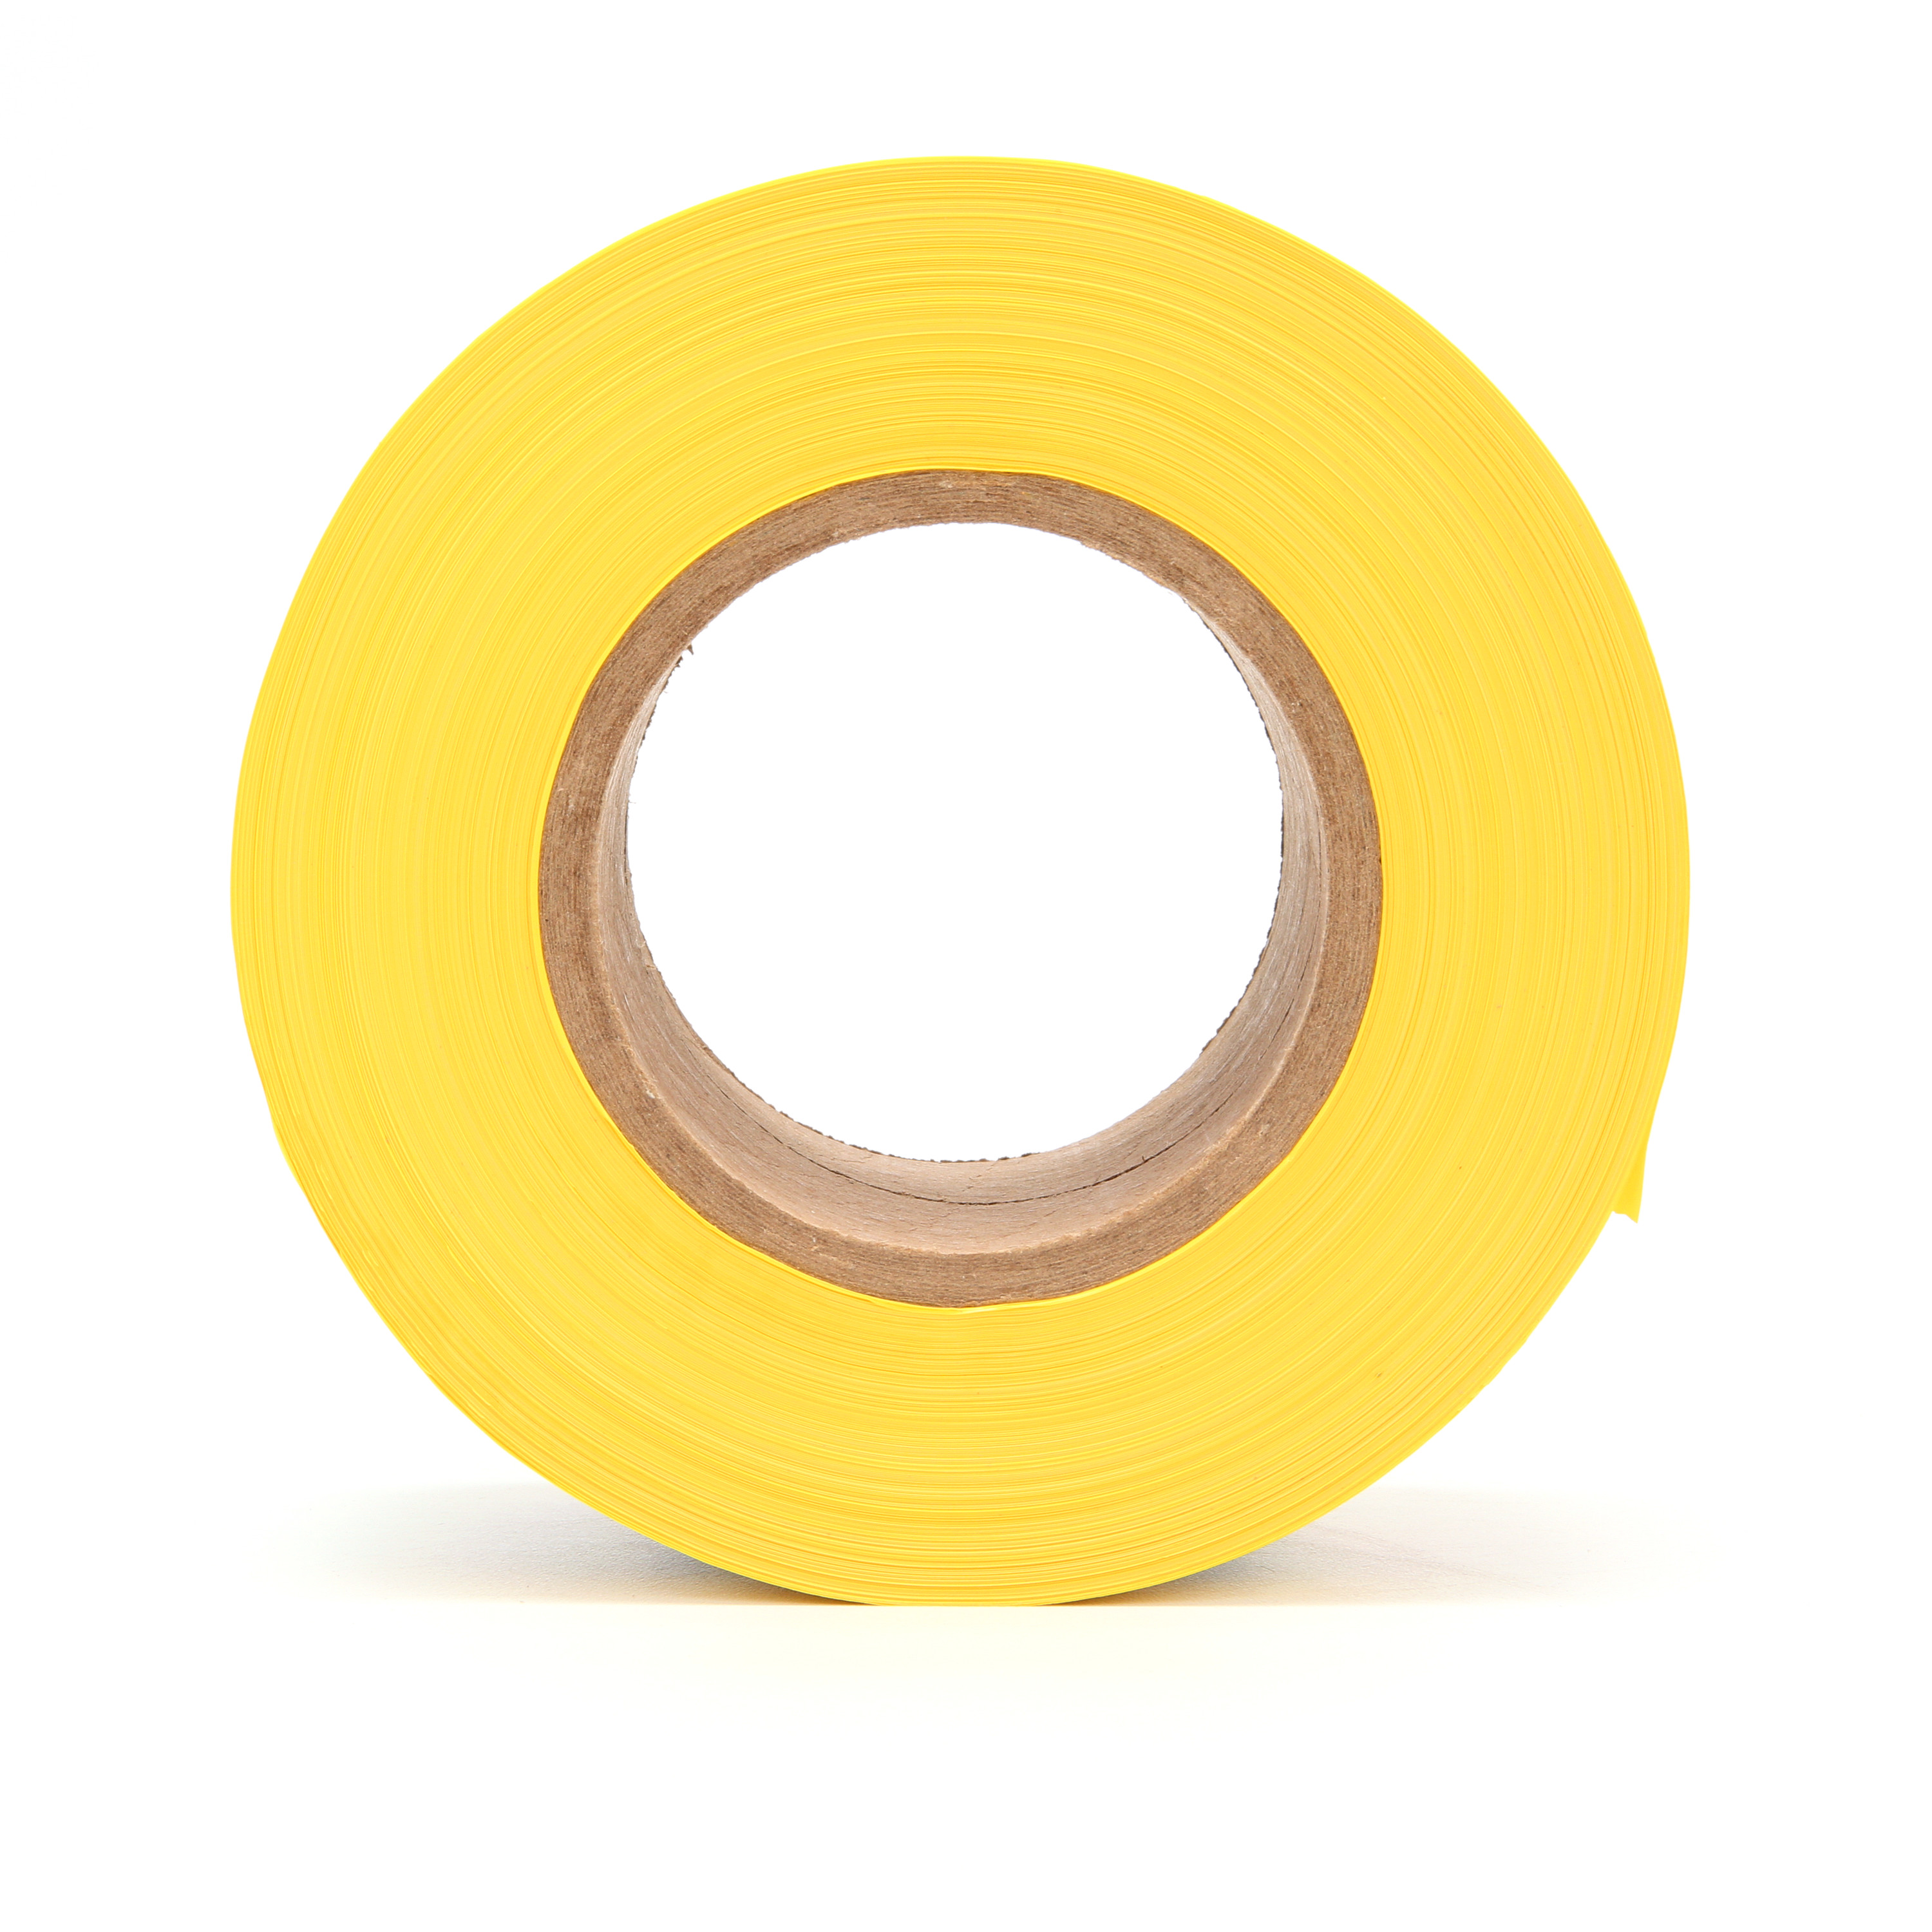 Scotch® Barricade Tape 358, CAUTION HIGH VOLTAGE, 3 in x 1000 ft,
Yellow, 8 rolls/Case